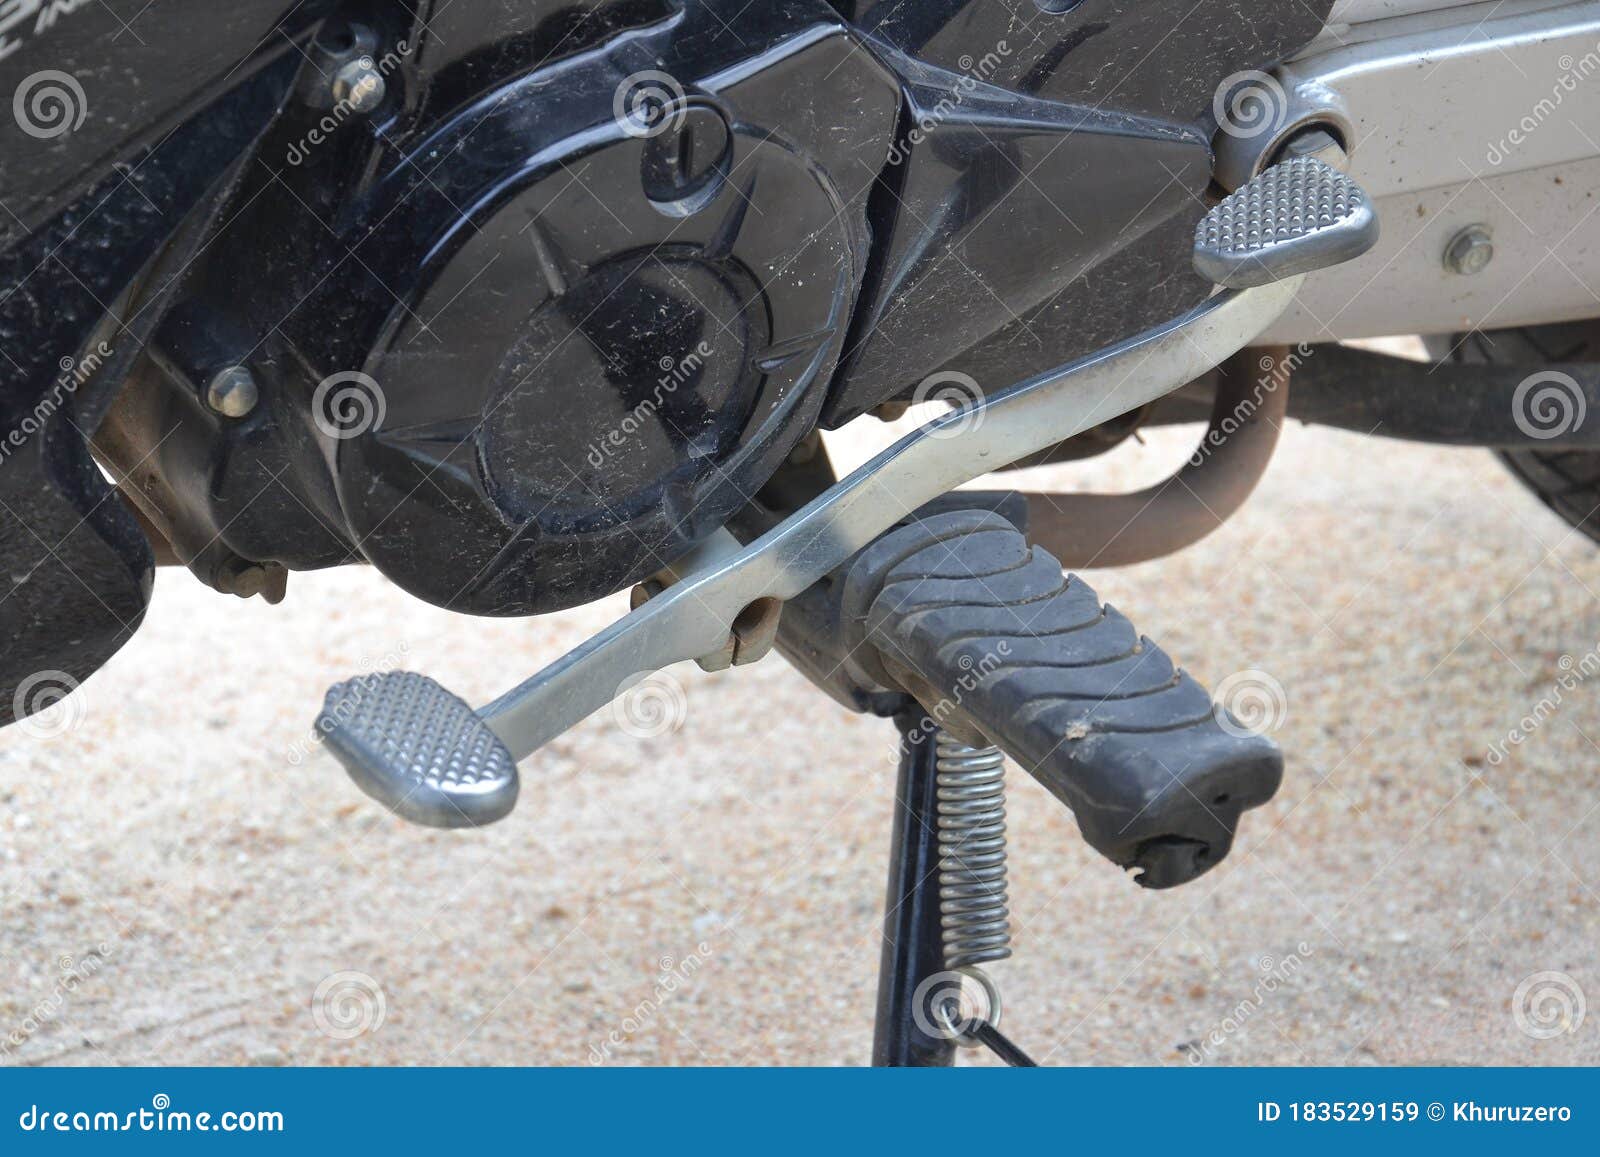 Gear pedal of motorcycle stock image. Image of tough - 183529159